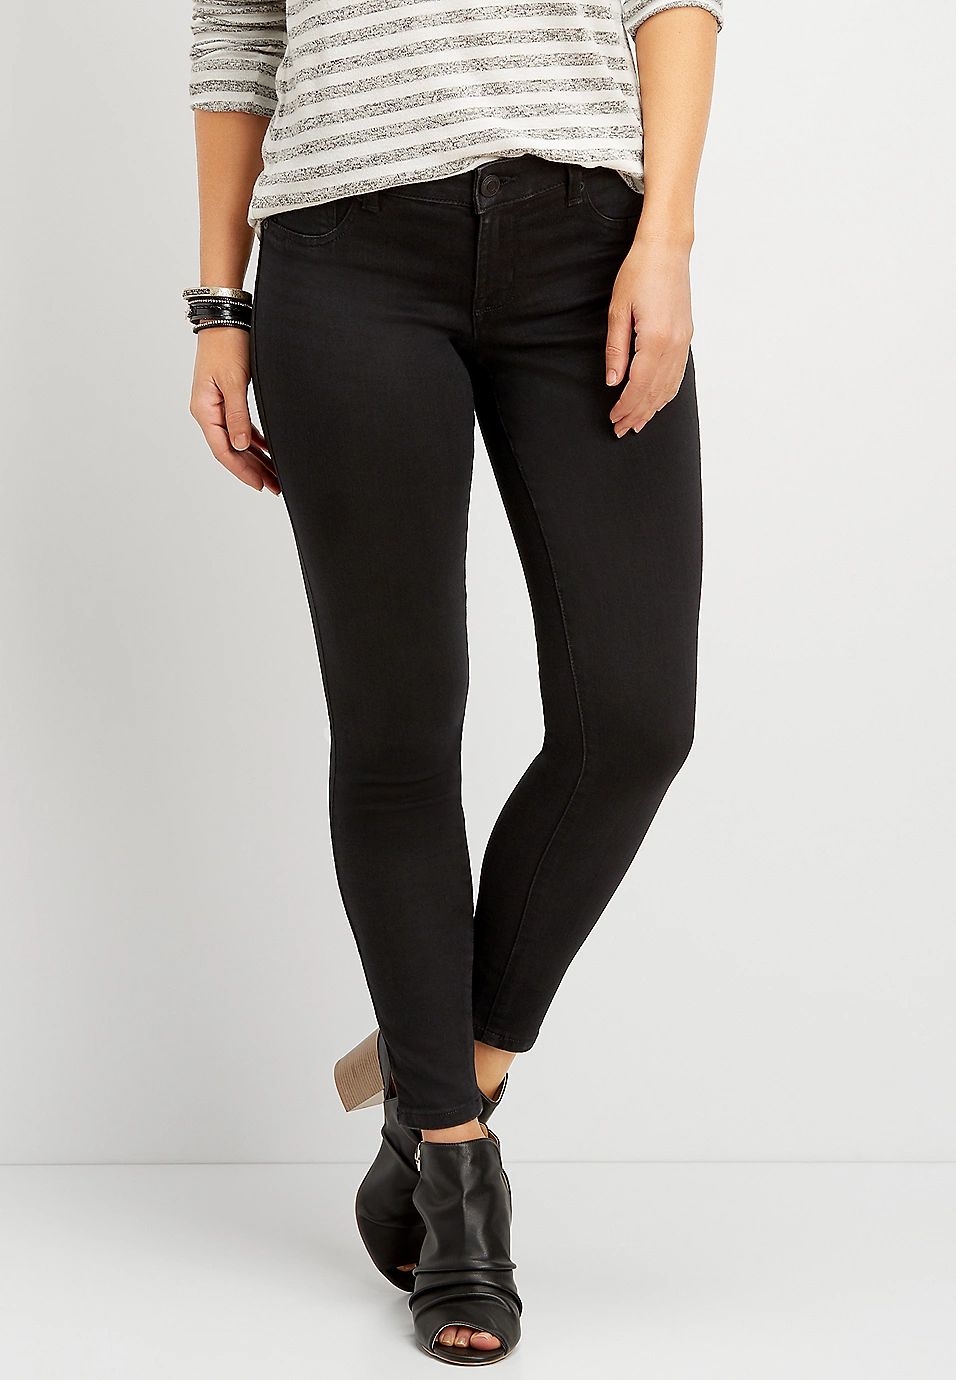 m jeans by maurices™ Black Mid Rise Jegging | Maurices